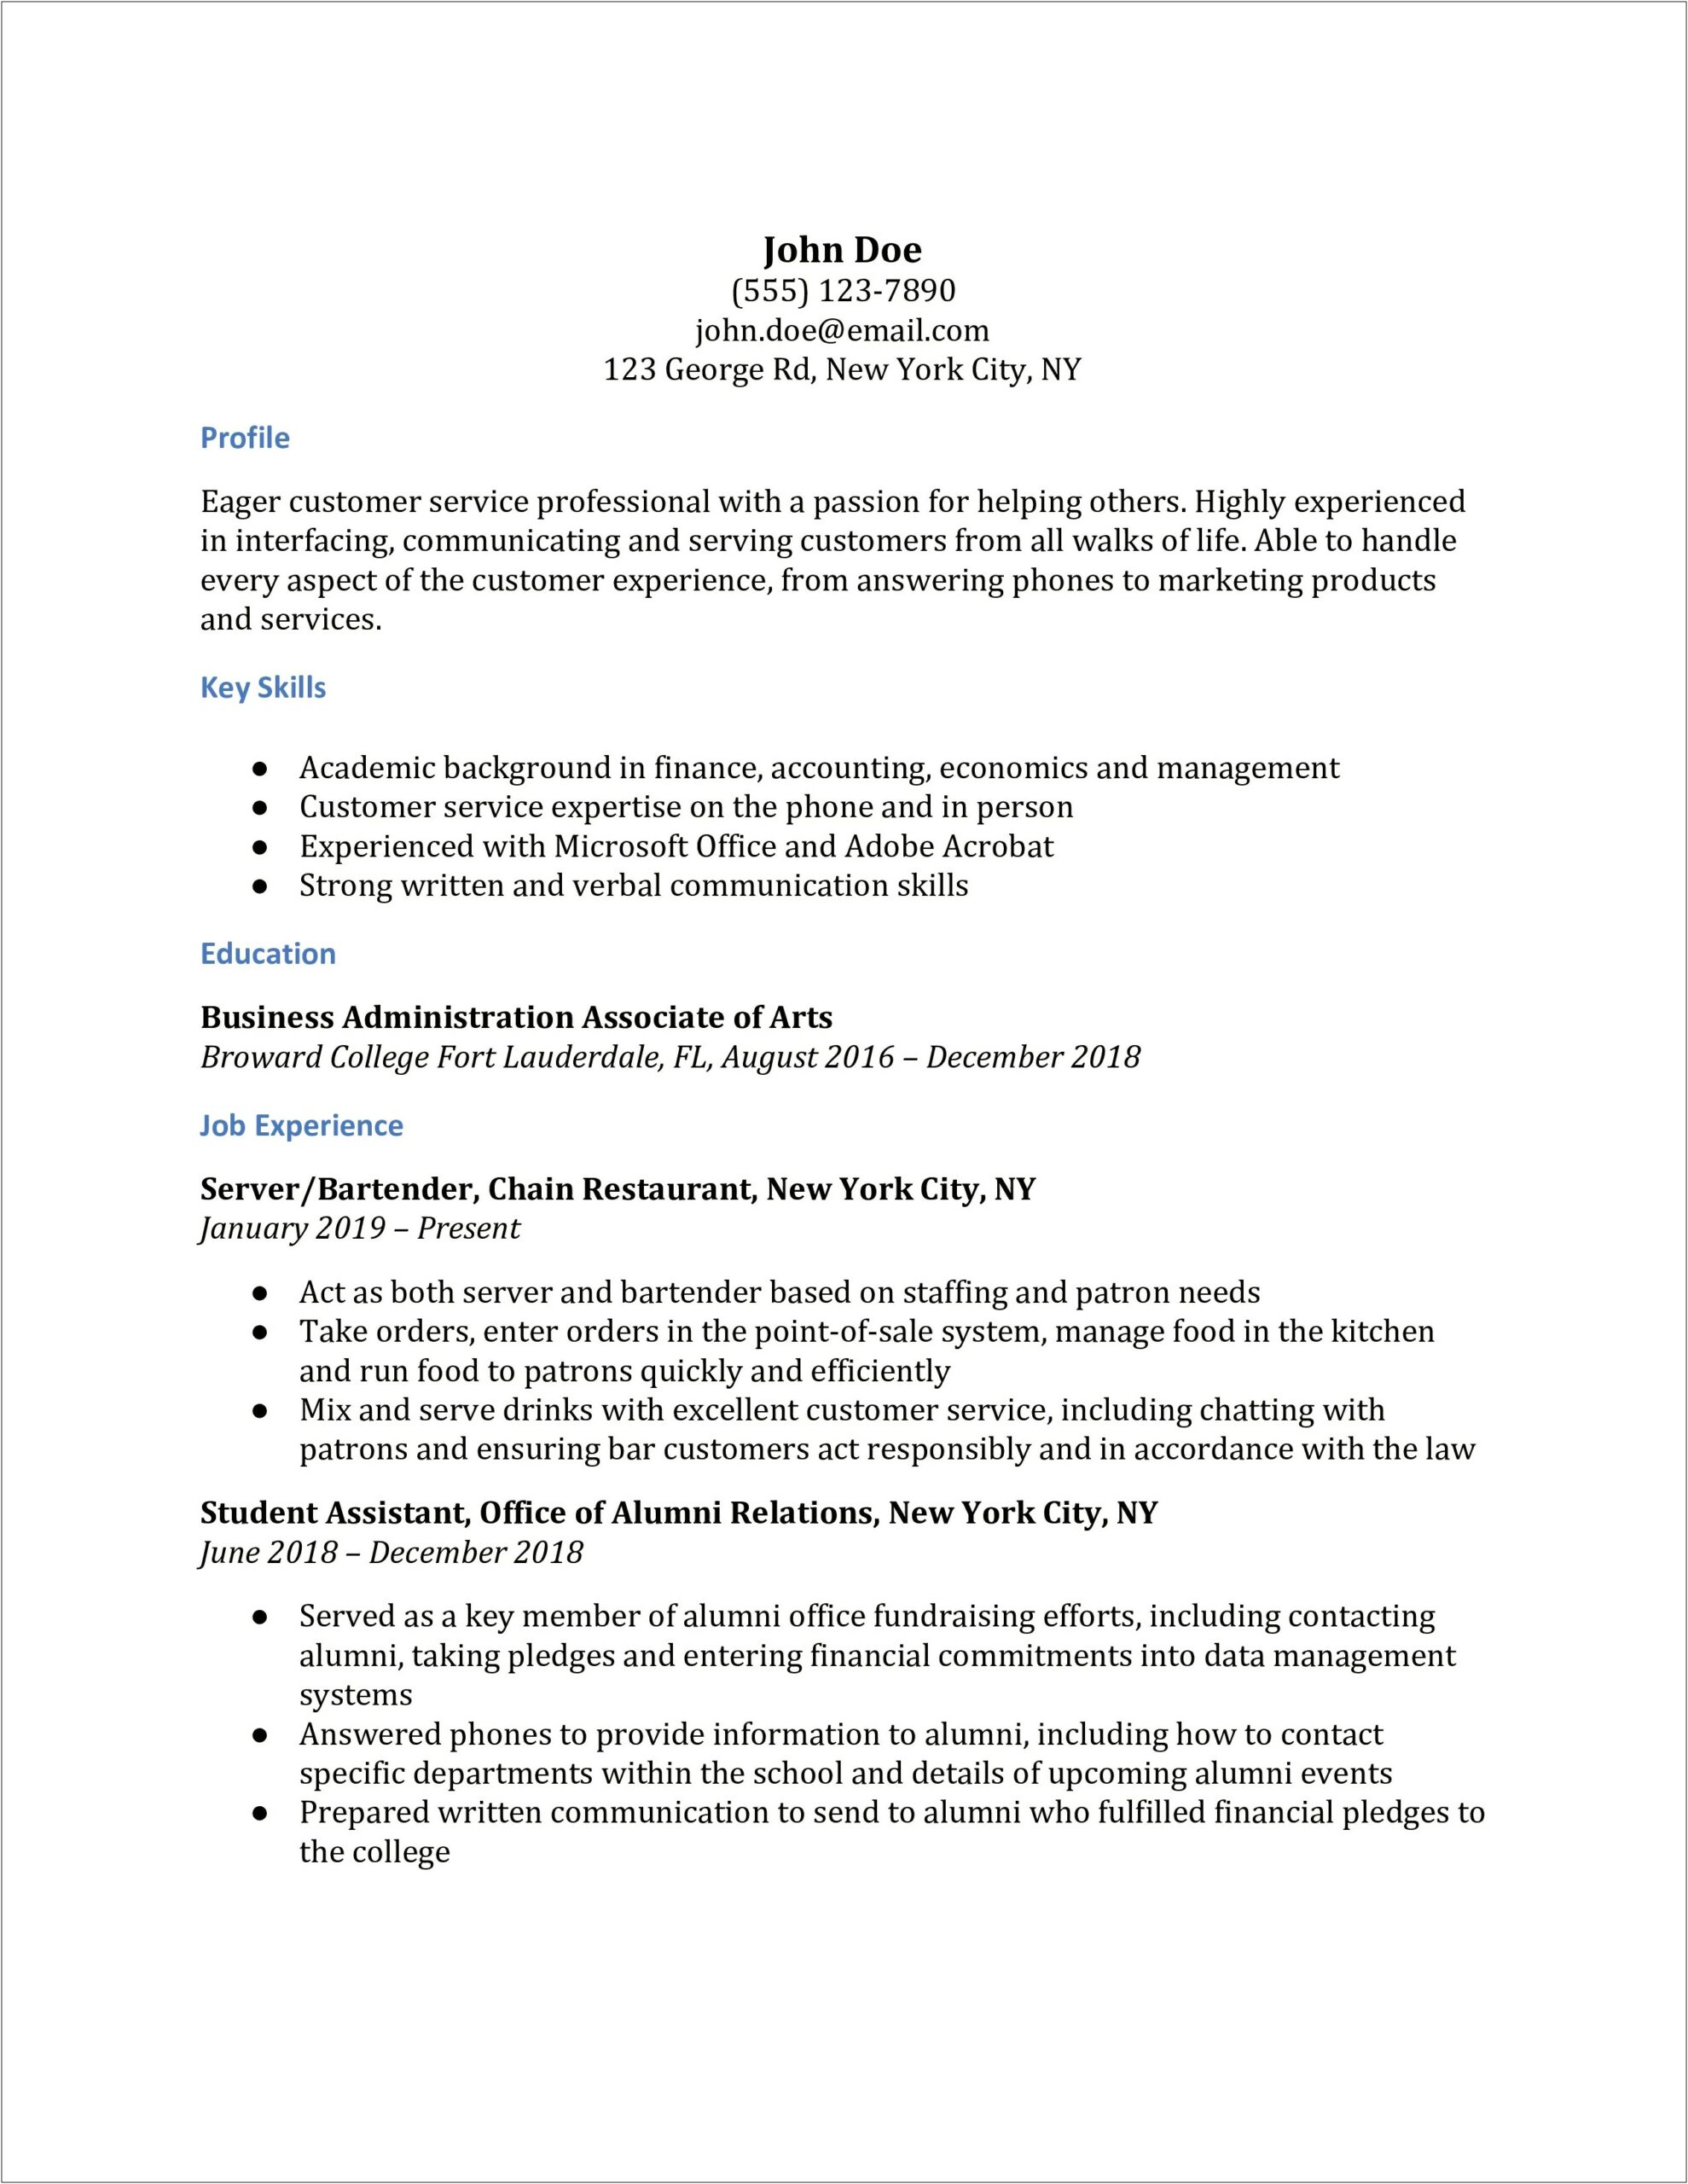 Examples Of Educational Administration Resumes